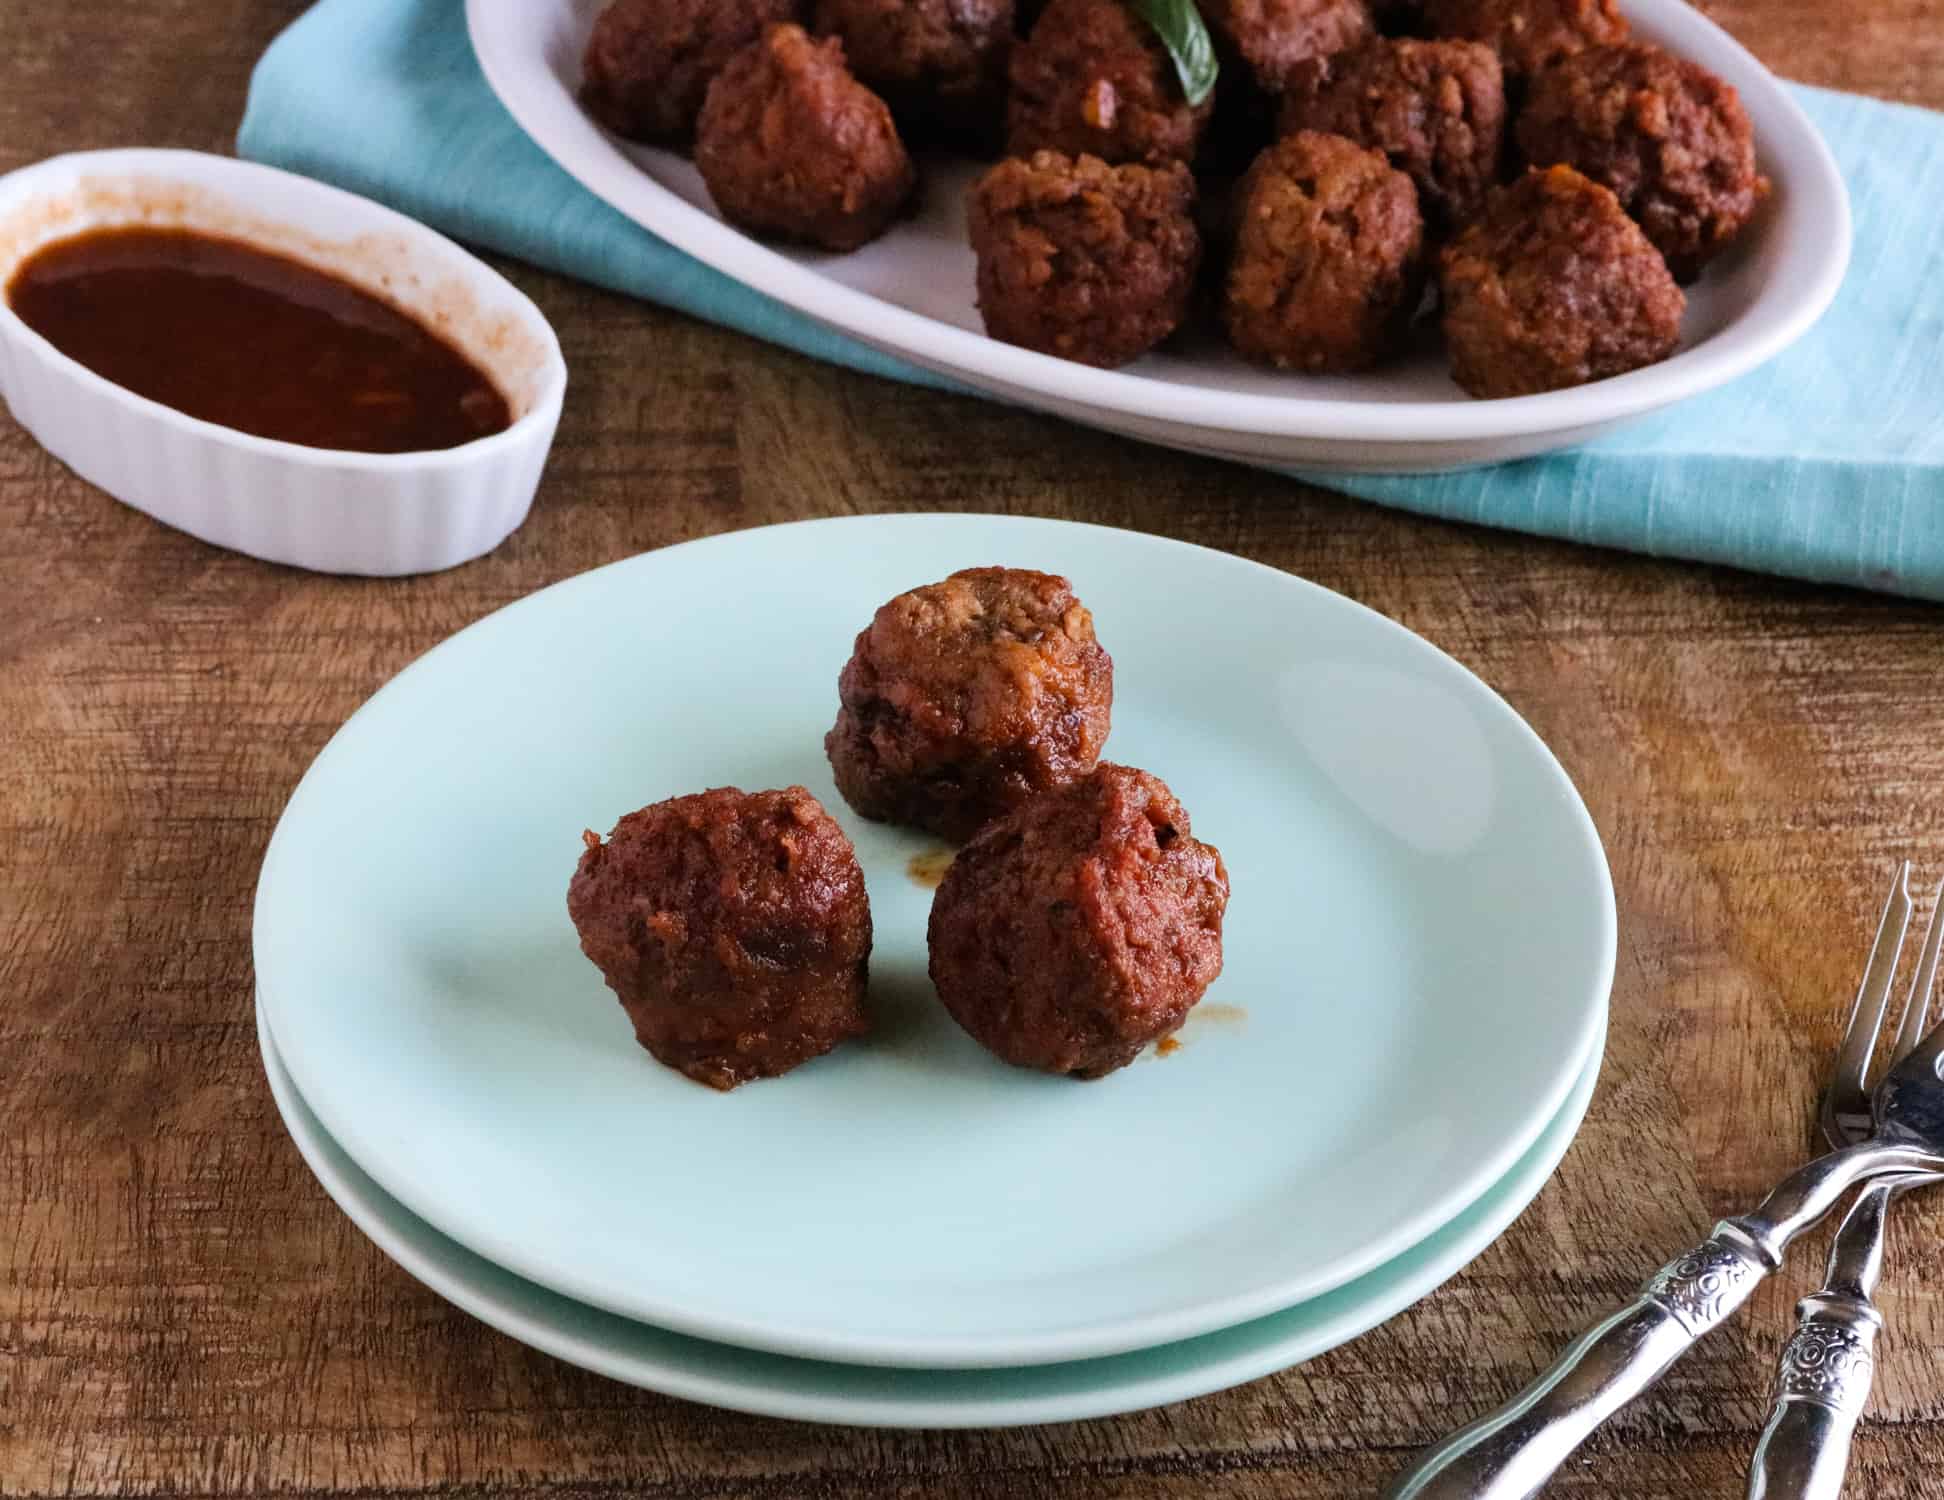 Three Instant Pot Orange BBQ Meatballs served on a blue plate next to a white platter holding the rest of the meatballs, with a ceramic dish of orange BBQ sauce on the side